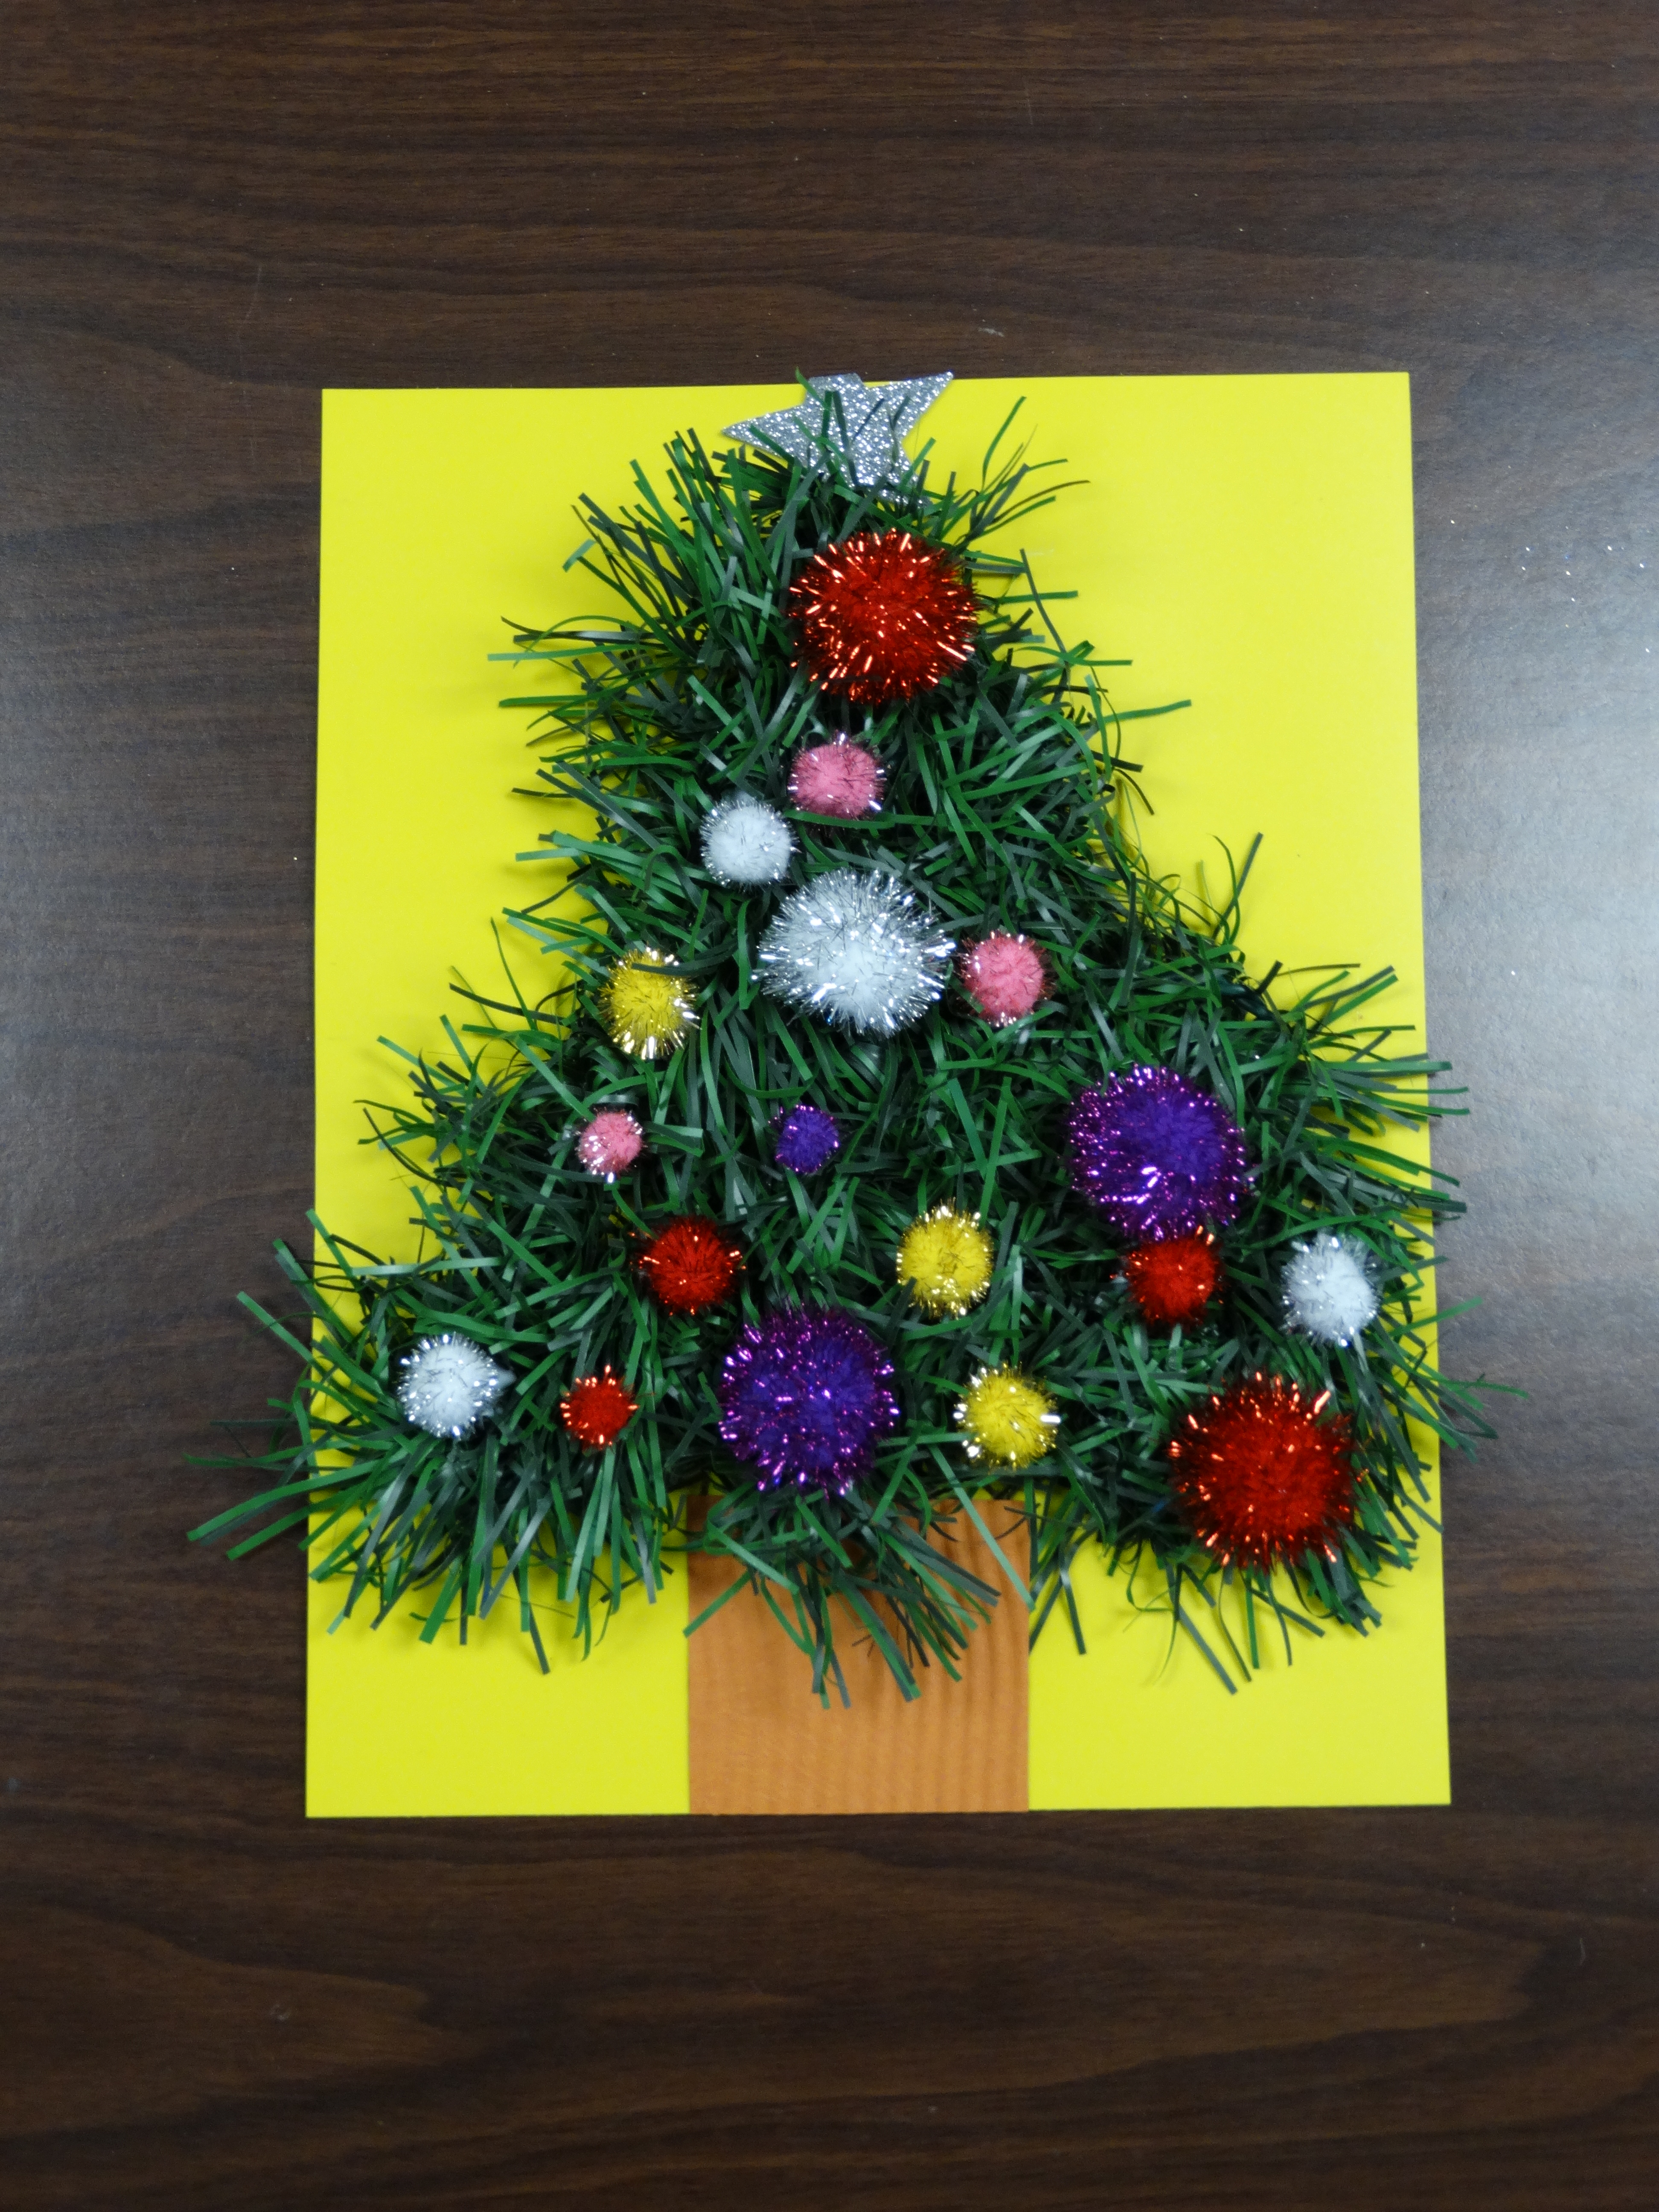 garland shaped into a tree with fuzzy pom poms on a piece of yellow paper